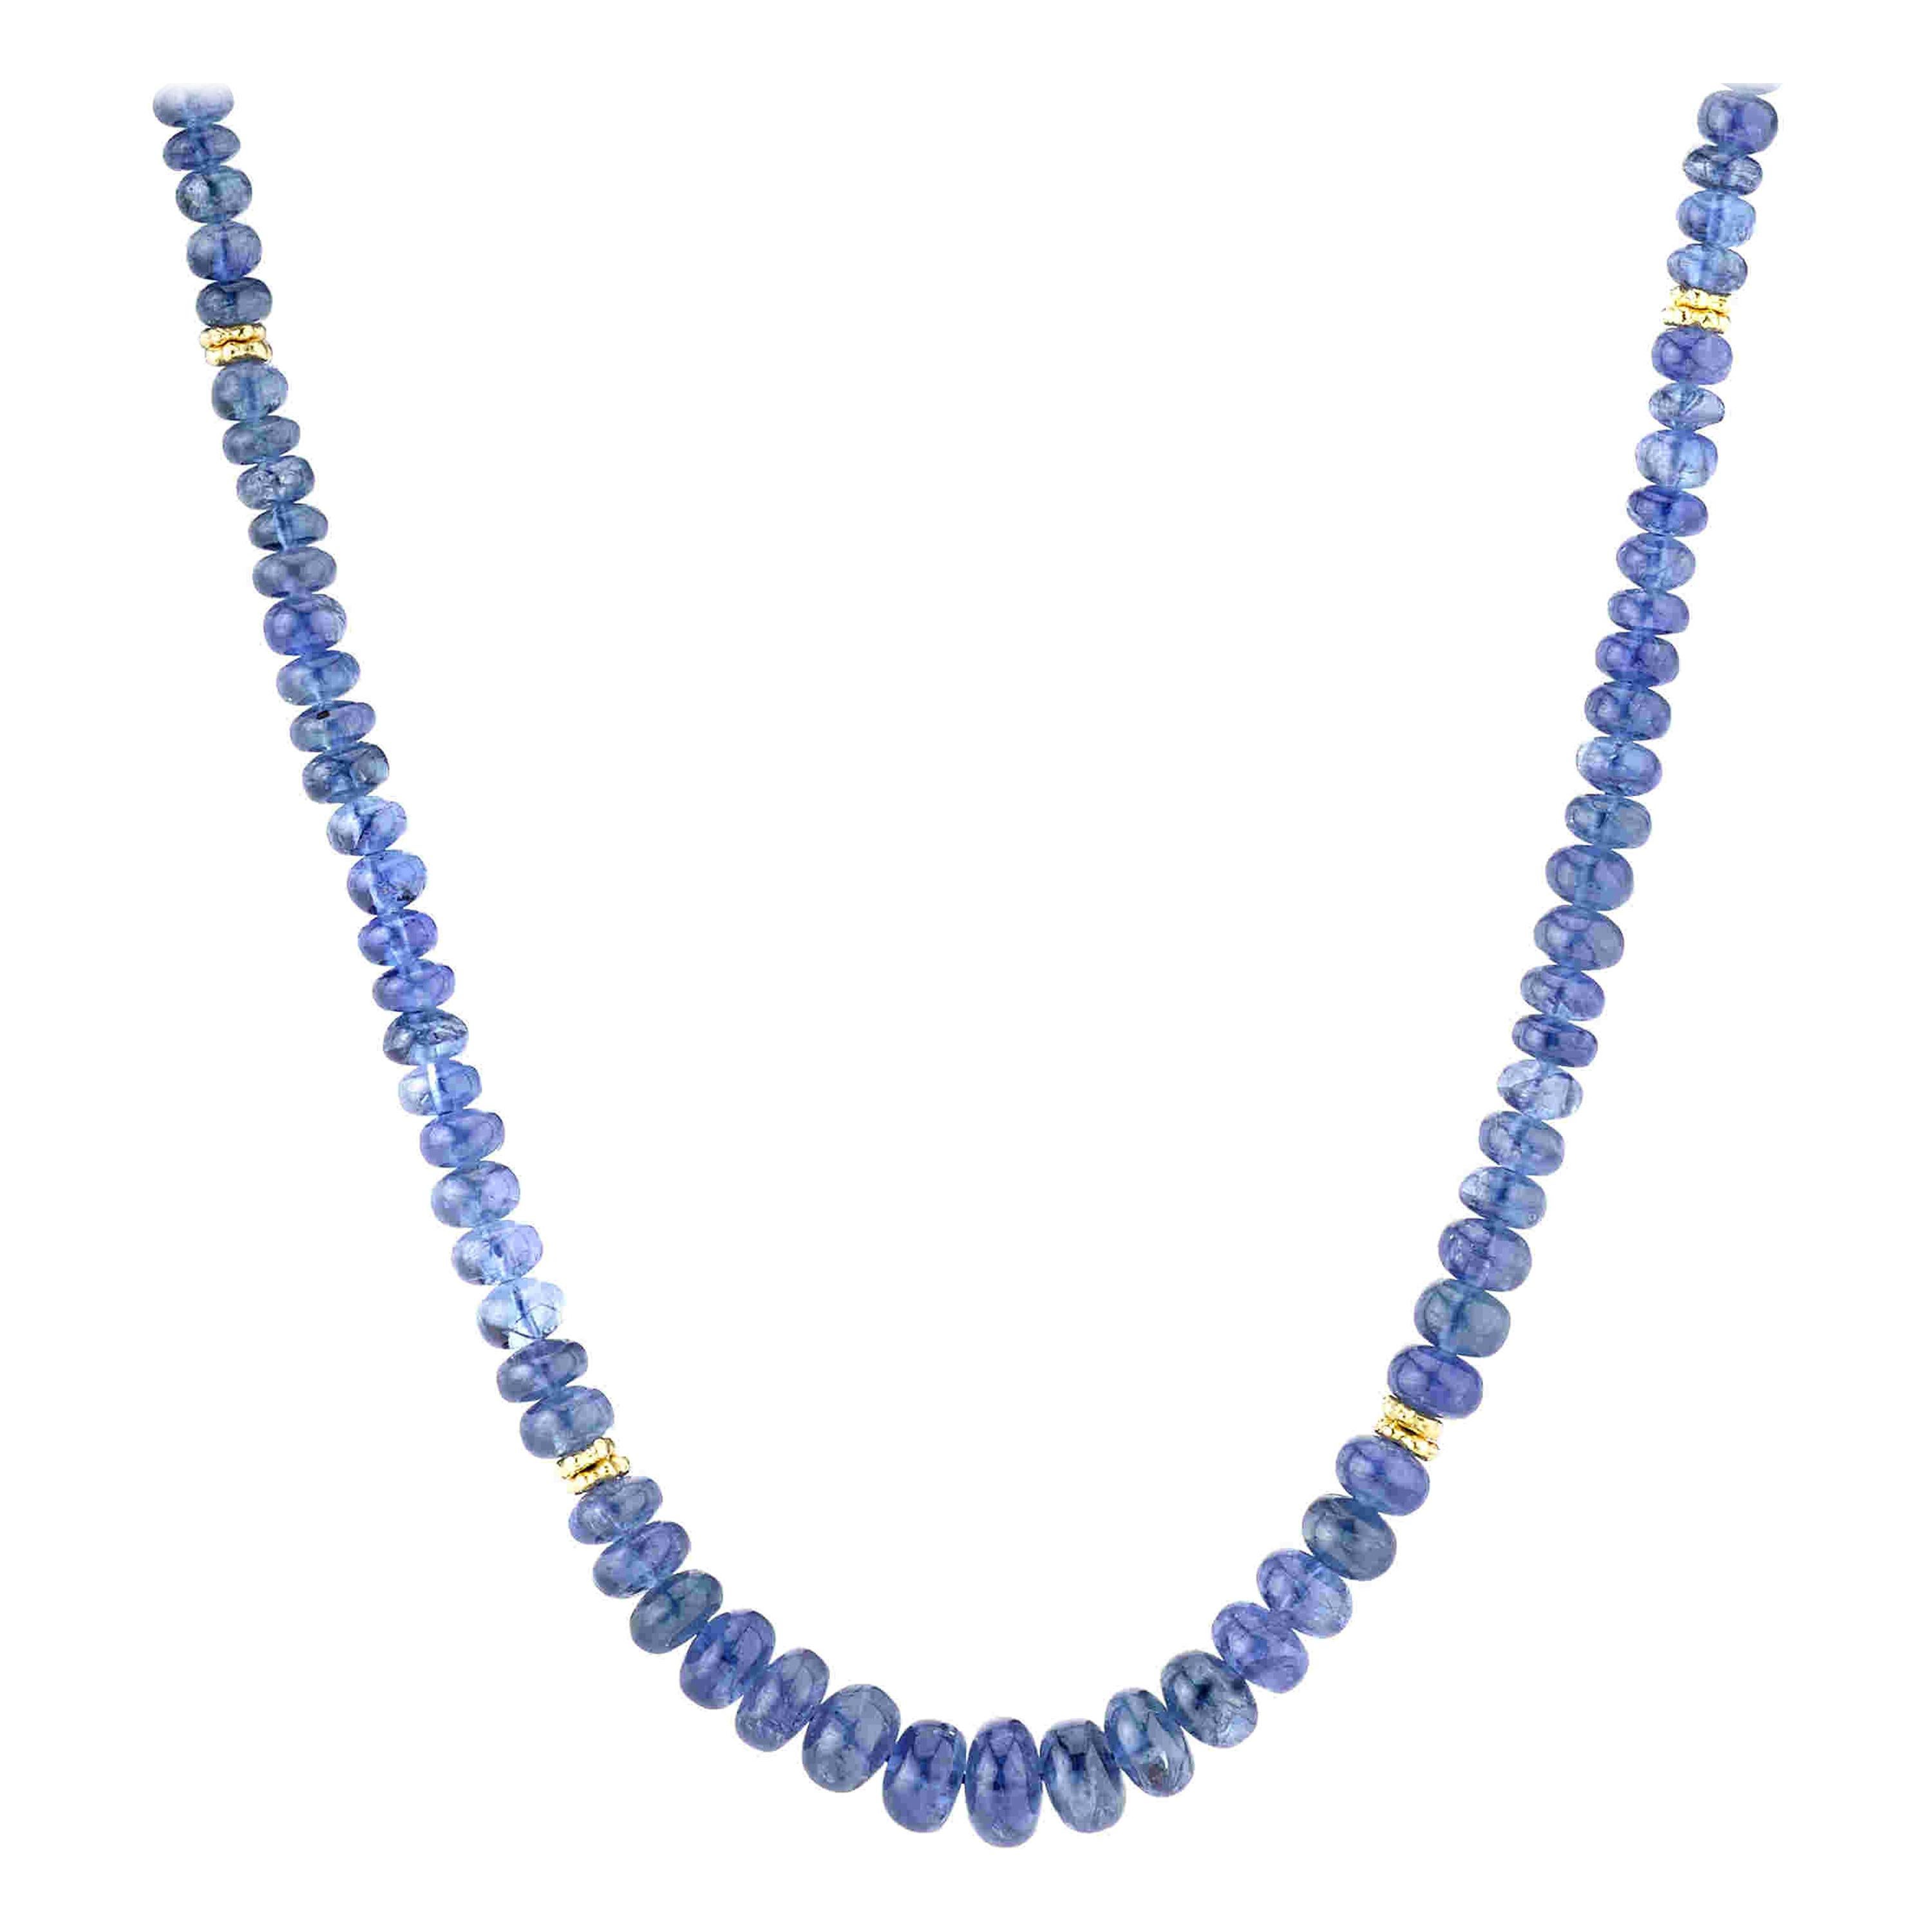 Blue Sapphire Bead Single Strand Necklace, Yellow Gold Spacers and Clasp